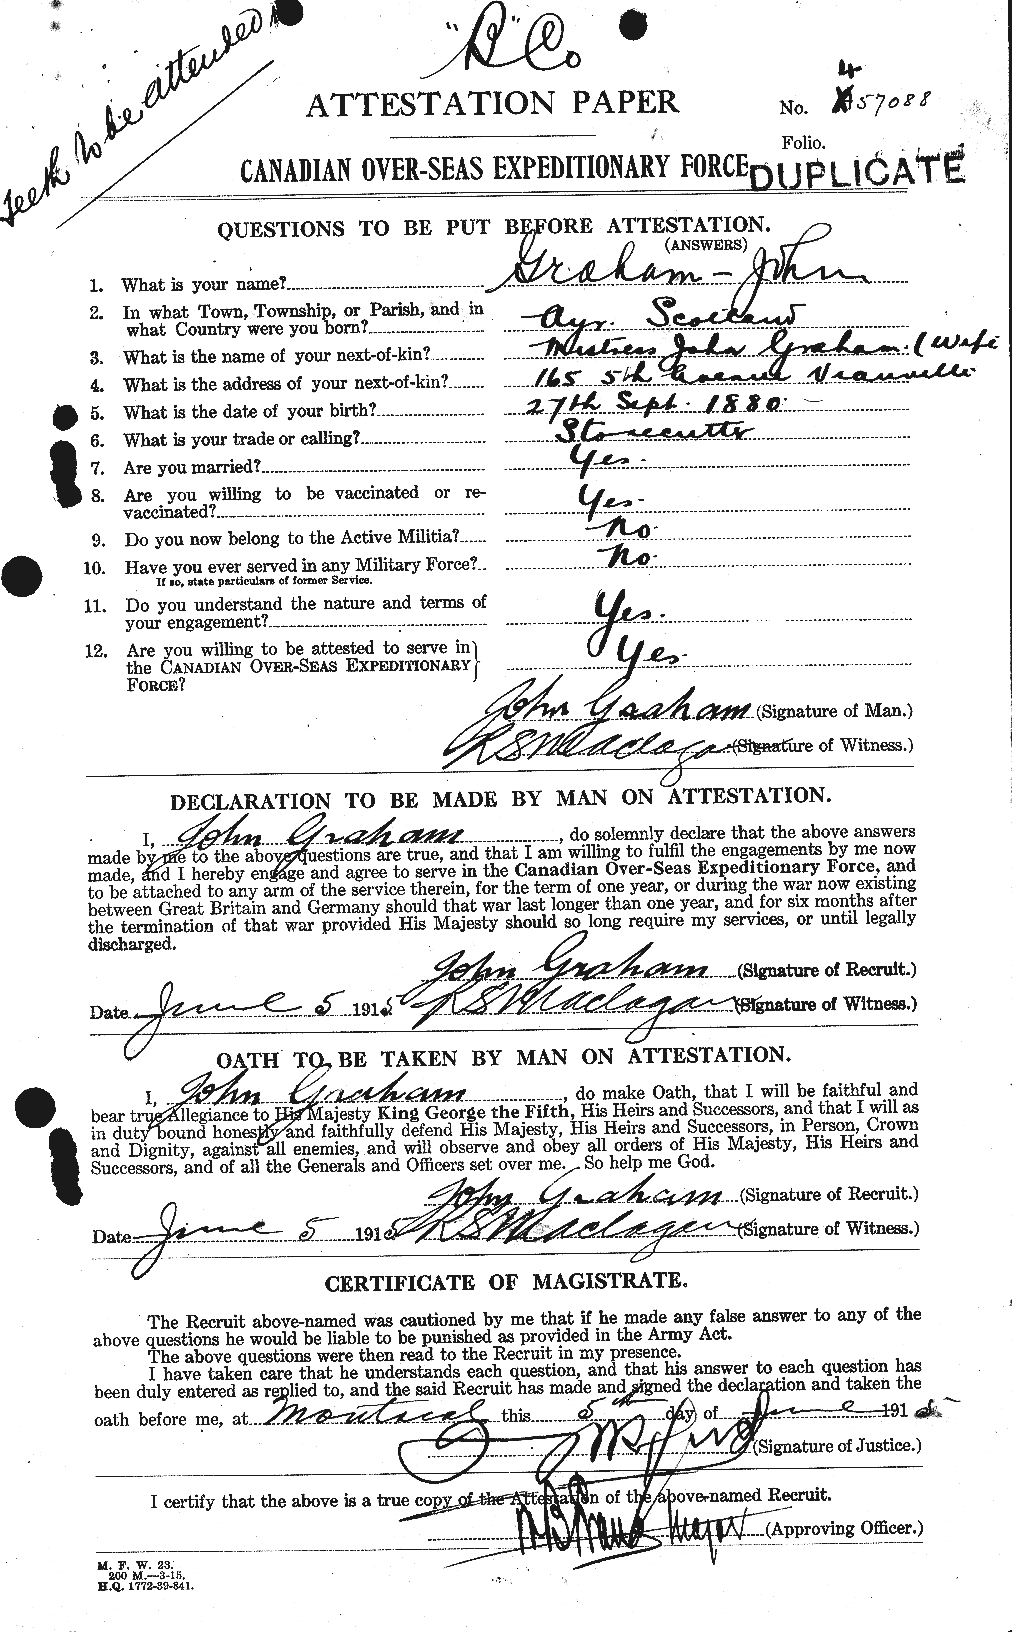 Personnel Records of the First World War - CEF 359131a